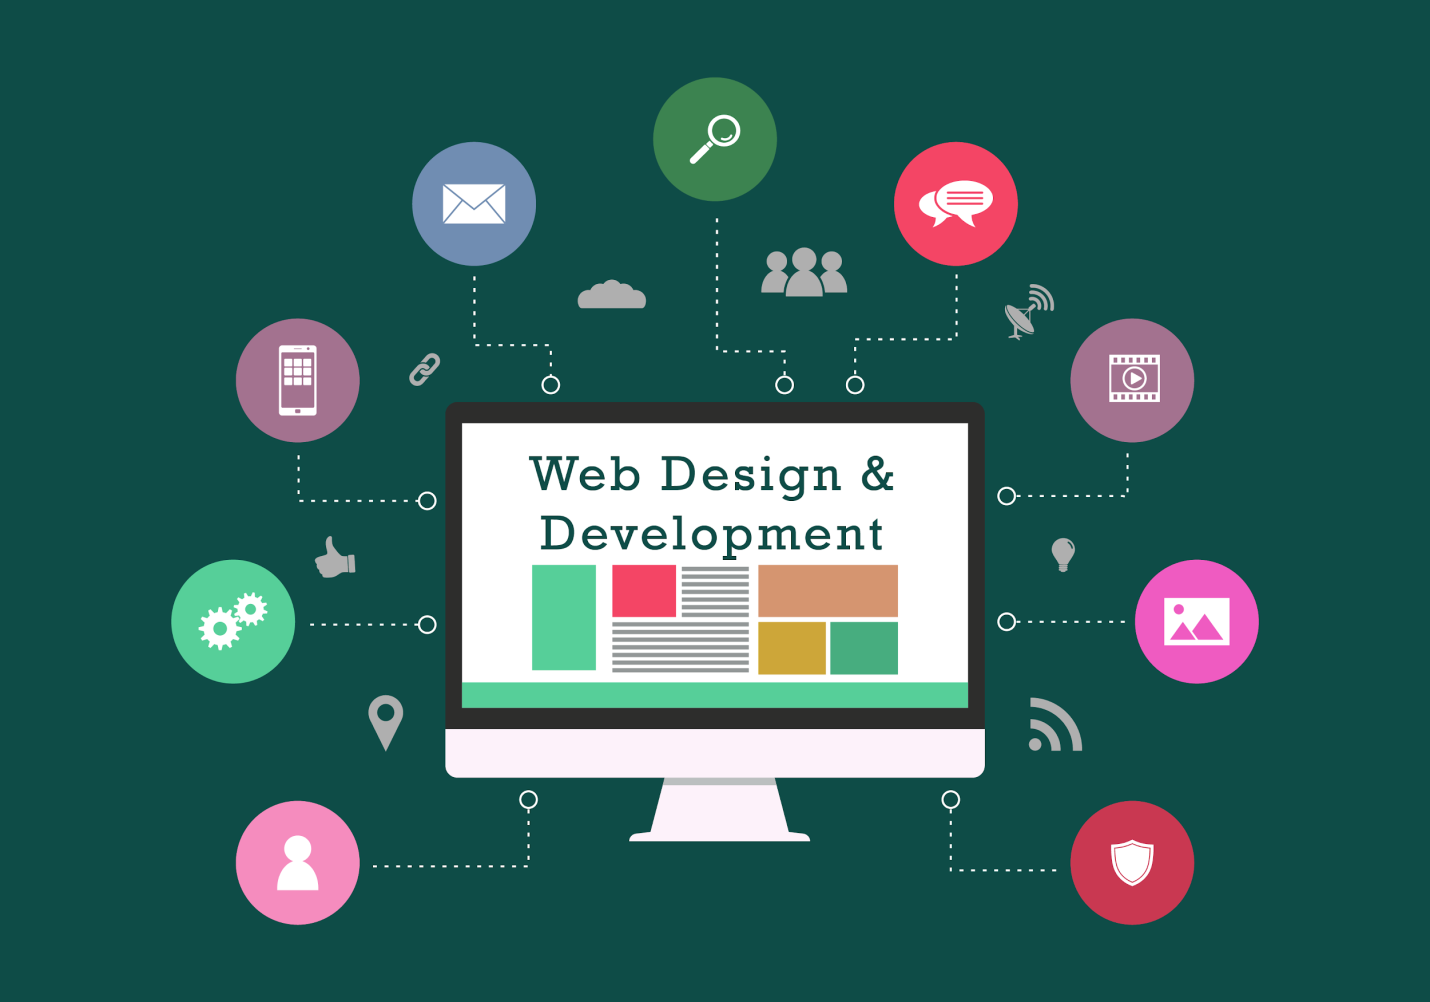 Top Things Every Web Designer Should Know